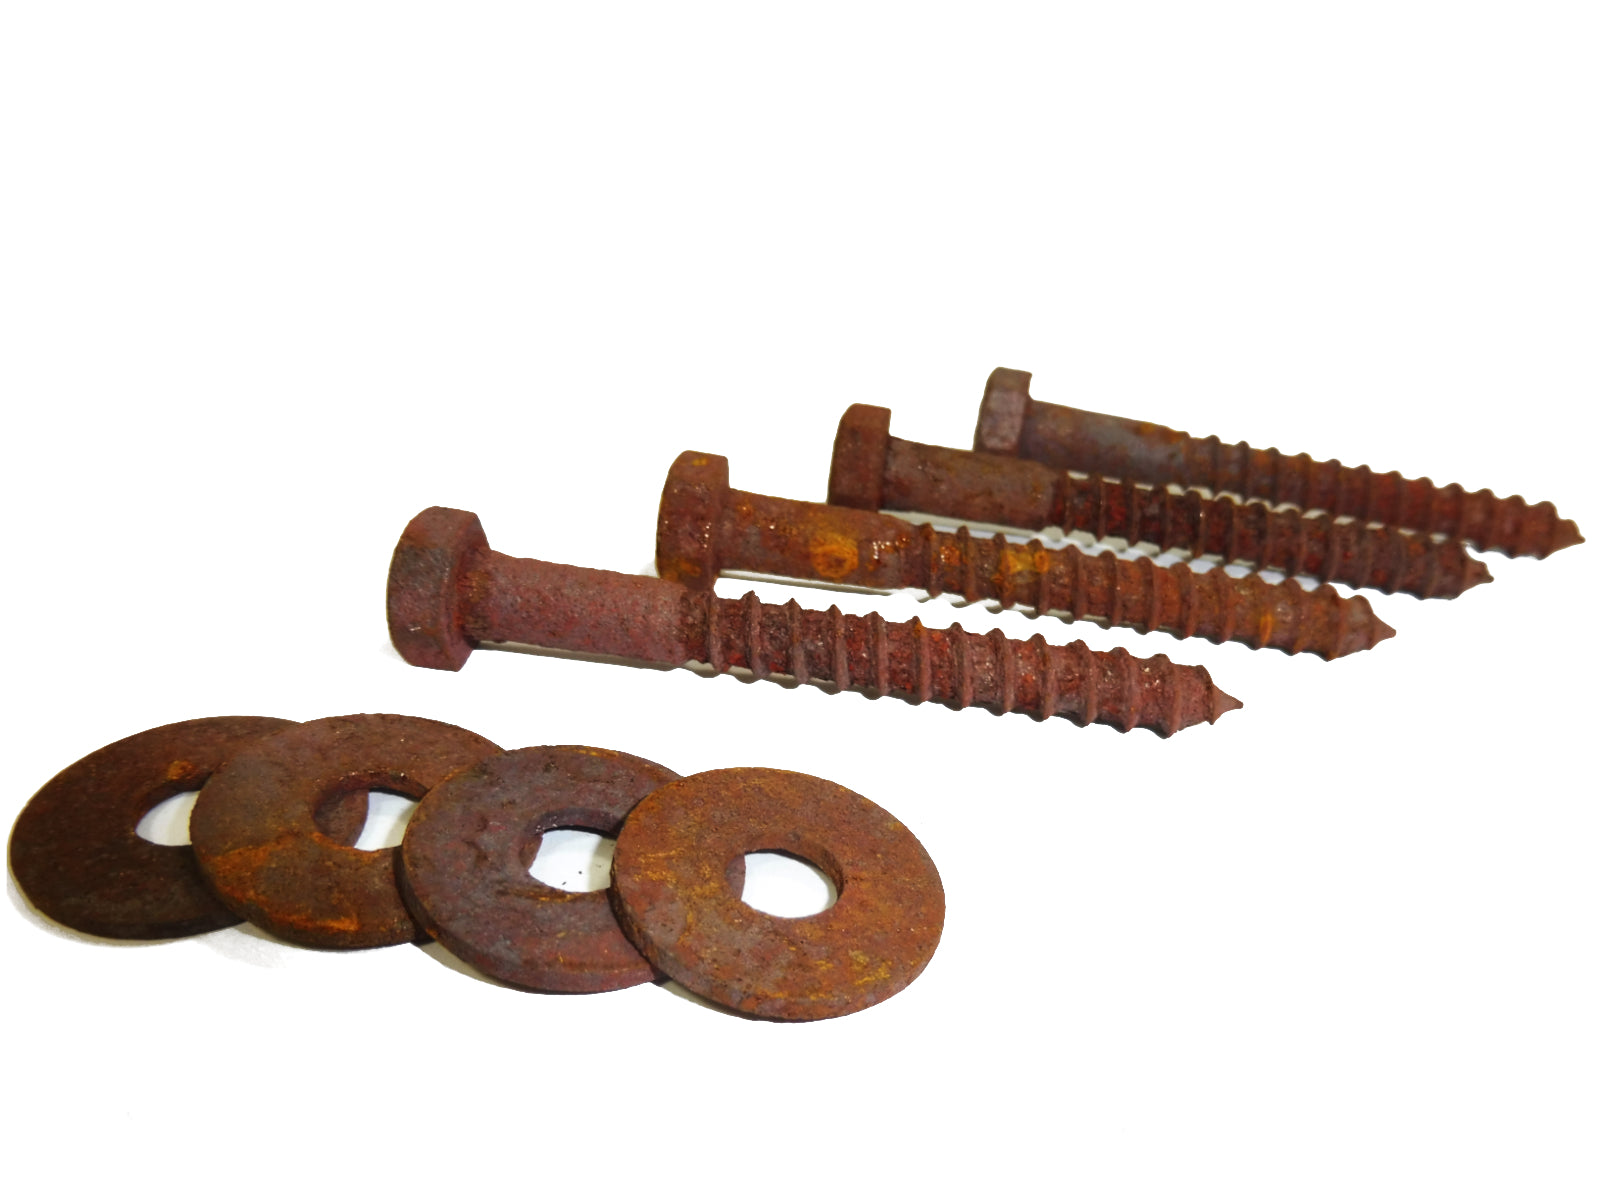 vitaliano rusty hexagonal wood screws, 8mm thick, 70mm long, antique, retro, vintage style, metal rust decoration - robust & rustic key screw ideal for vitaliano rusty iron chain - set of 4 including washers - Bild 2